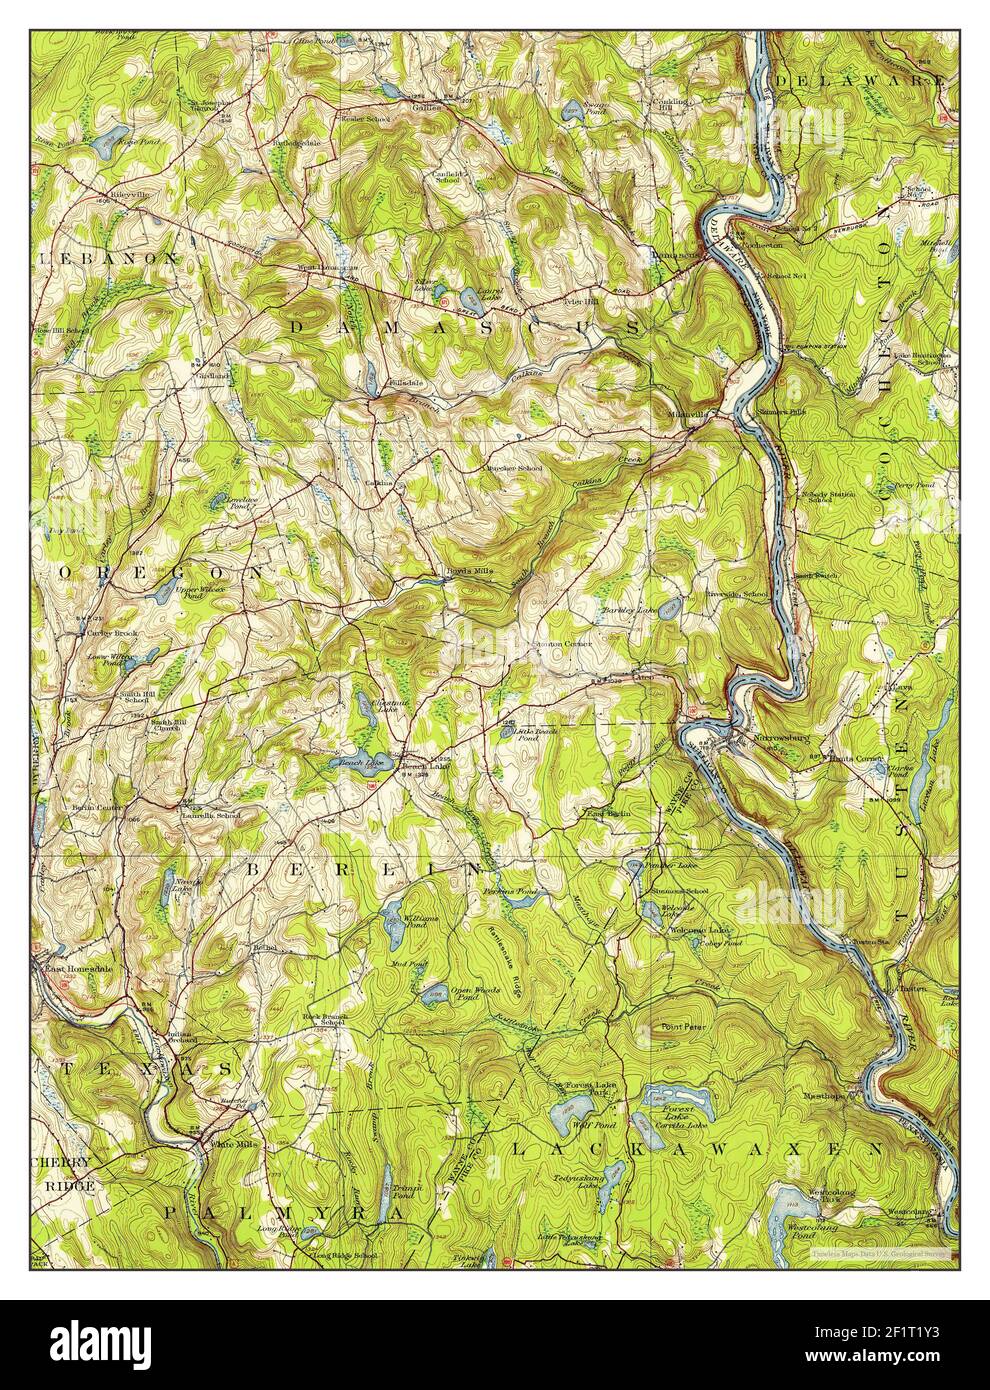 Damascus, Pennsylvania, map 1920, 1:62500, United States of America by Timeless Maps, data U.S. Geological Survey Stock Photo